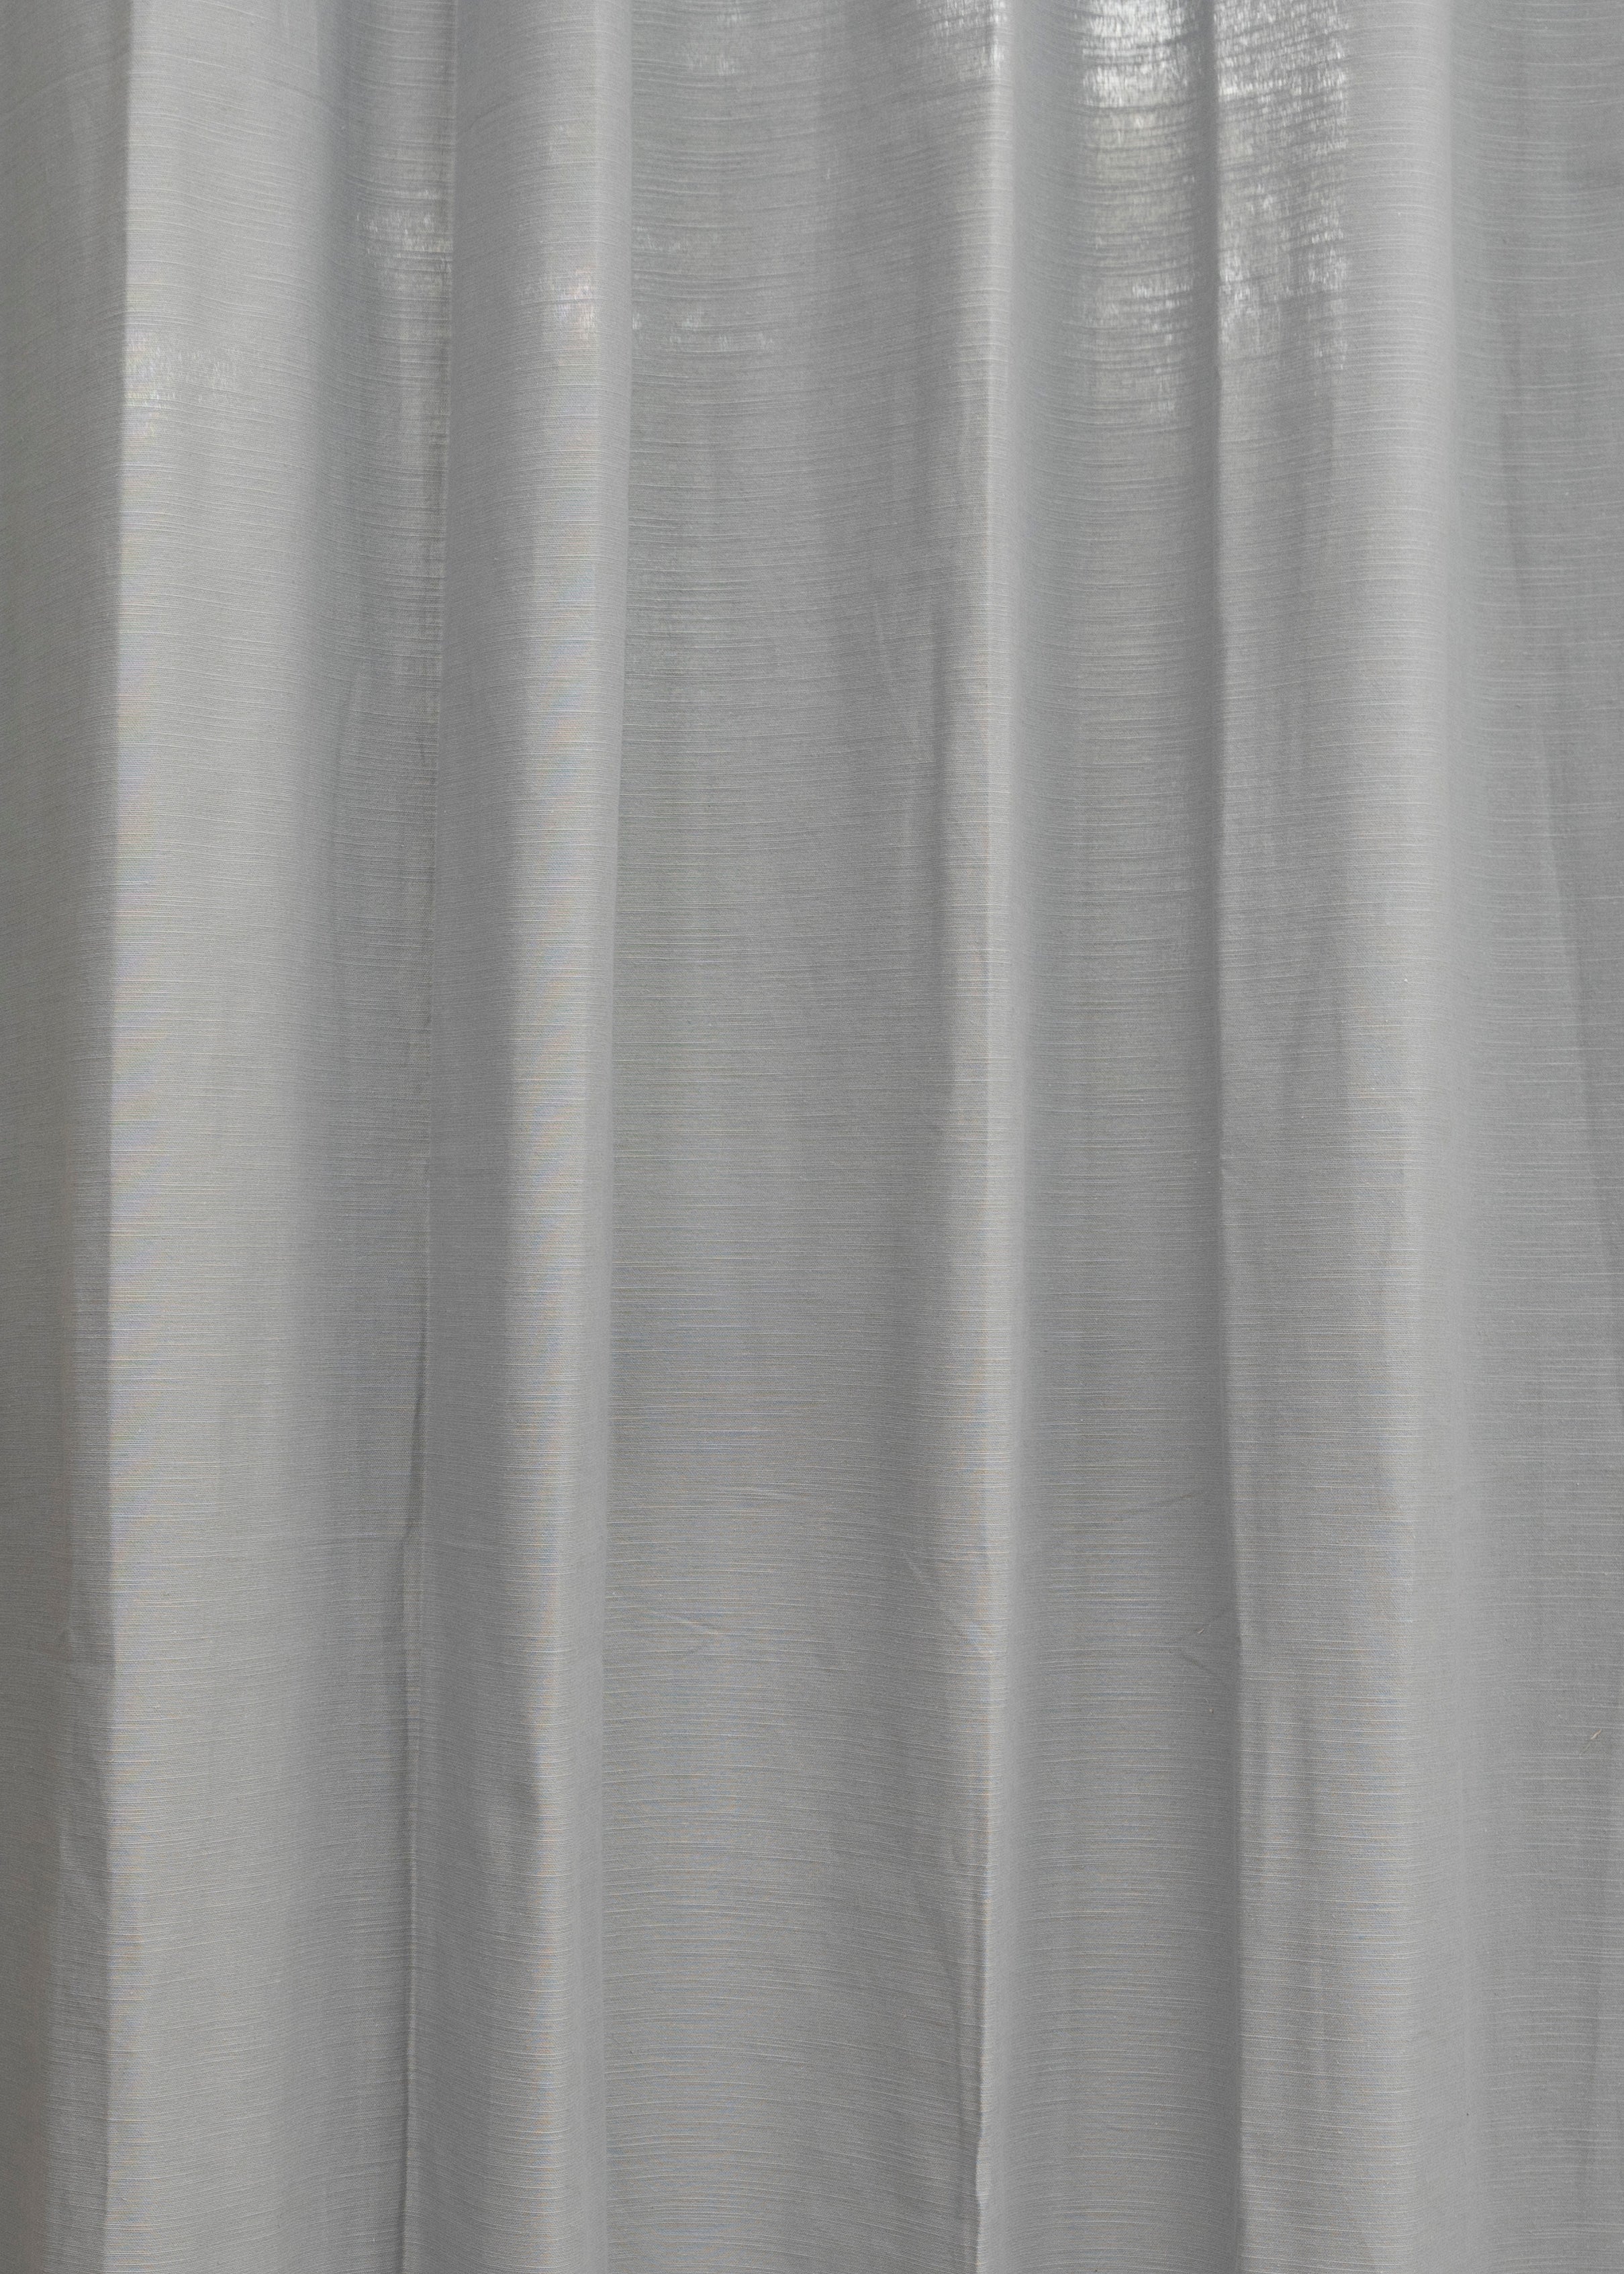 Solid Ultimate grey 100% cotton plain curtain for bedroom - Room darkening - Pack of 1